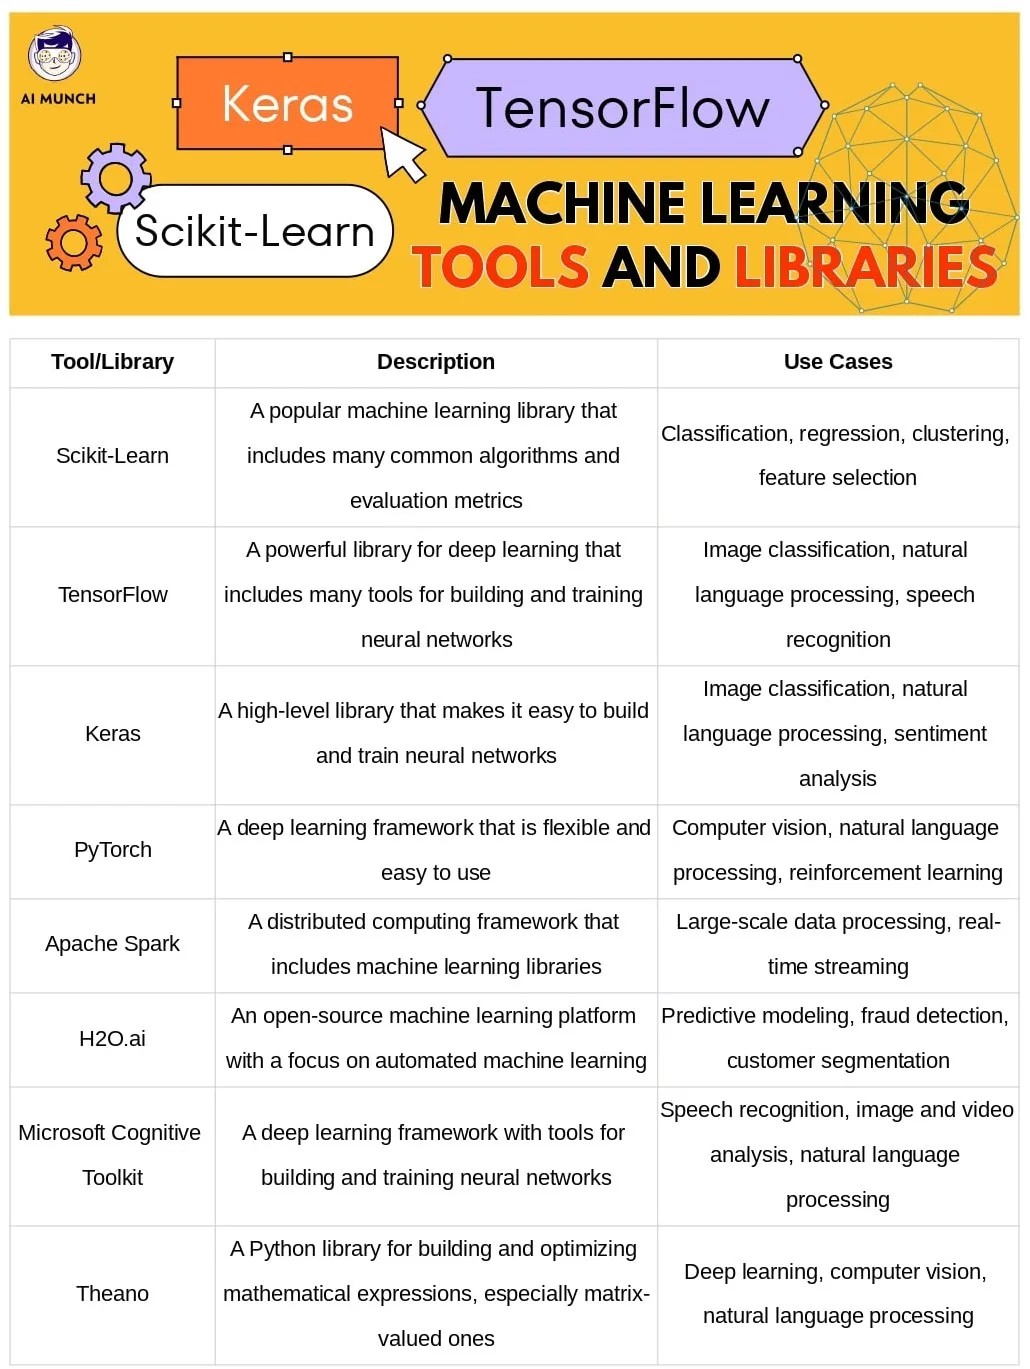 what are Machine Learning Tools and Libraries